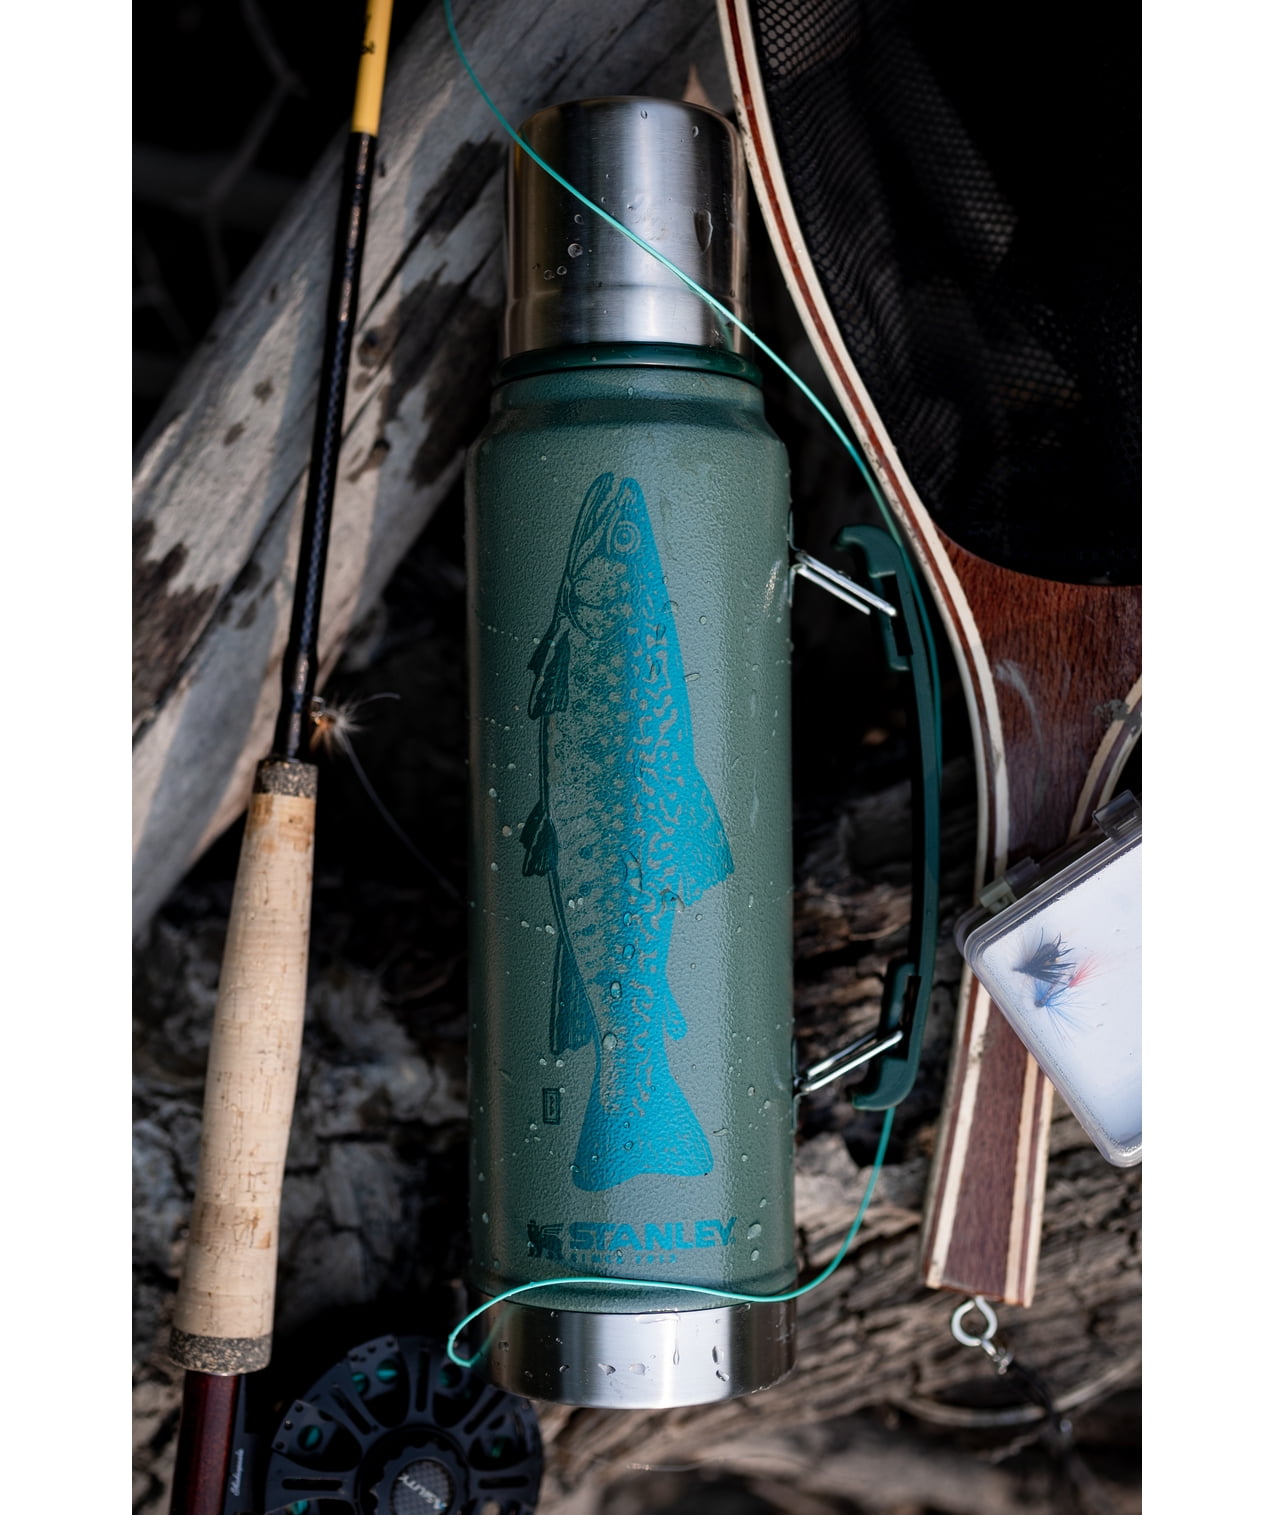 New 😉 Stanley Heritage Classic Bottle, Bottomland, 1.1 QT 🔥